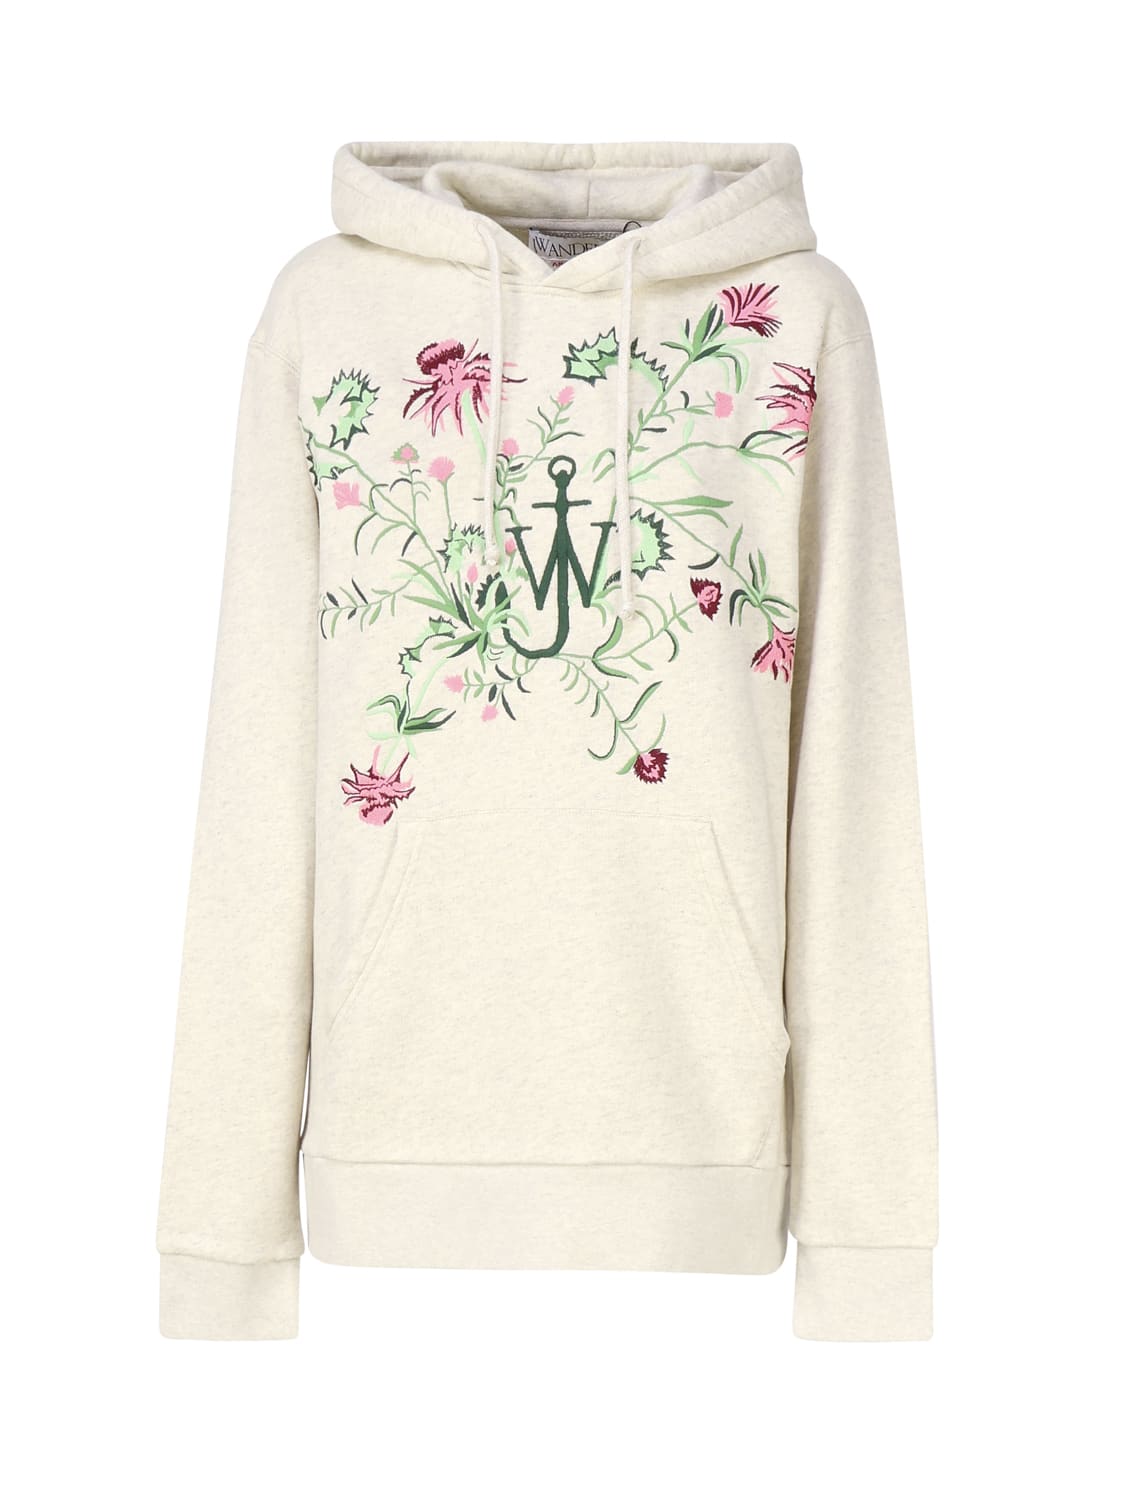 J.W. Anderson Sweatshirt With Embroidery